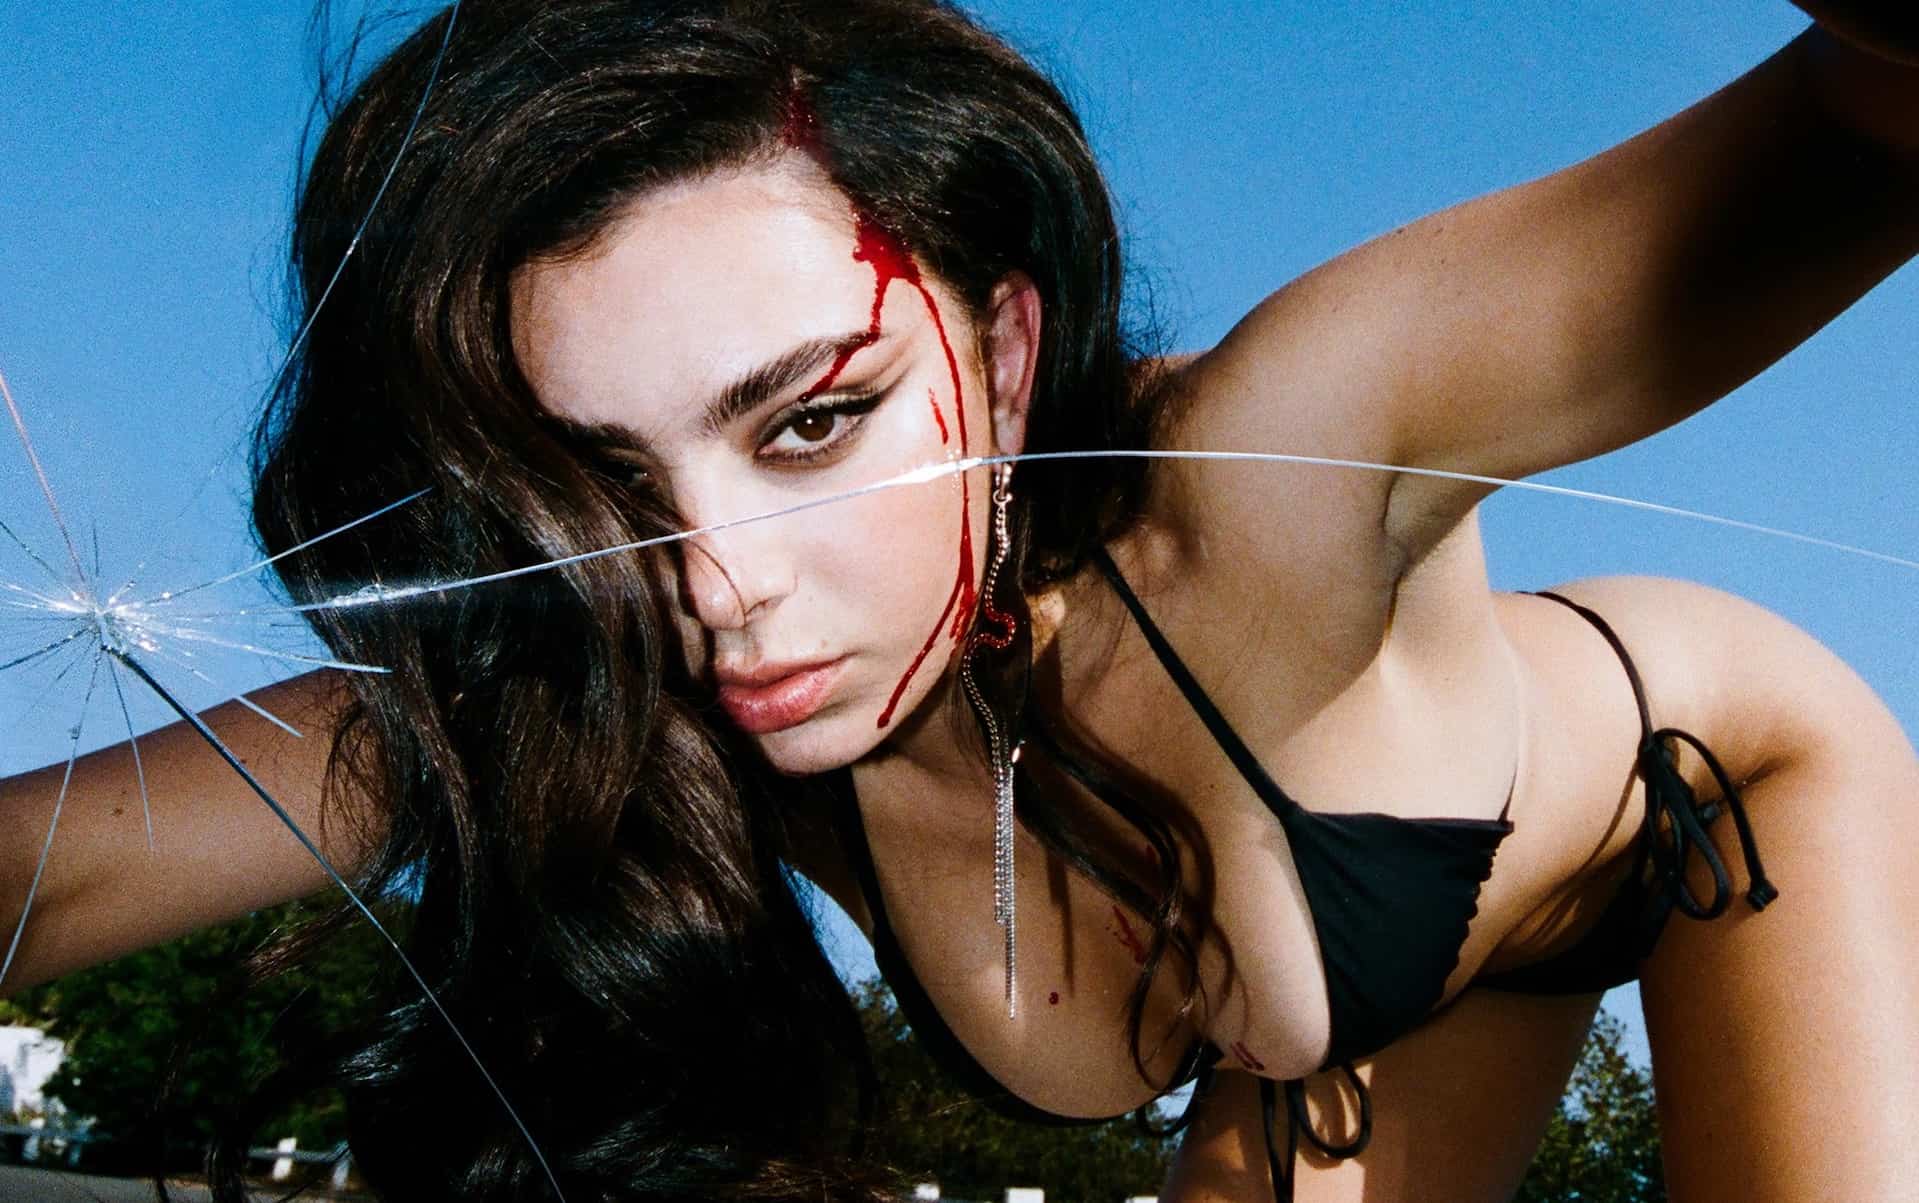 CHARLI XCX releases undeniable hit drenched album CRASH